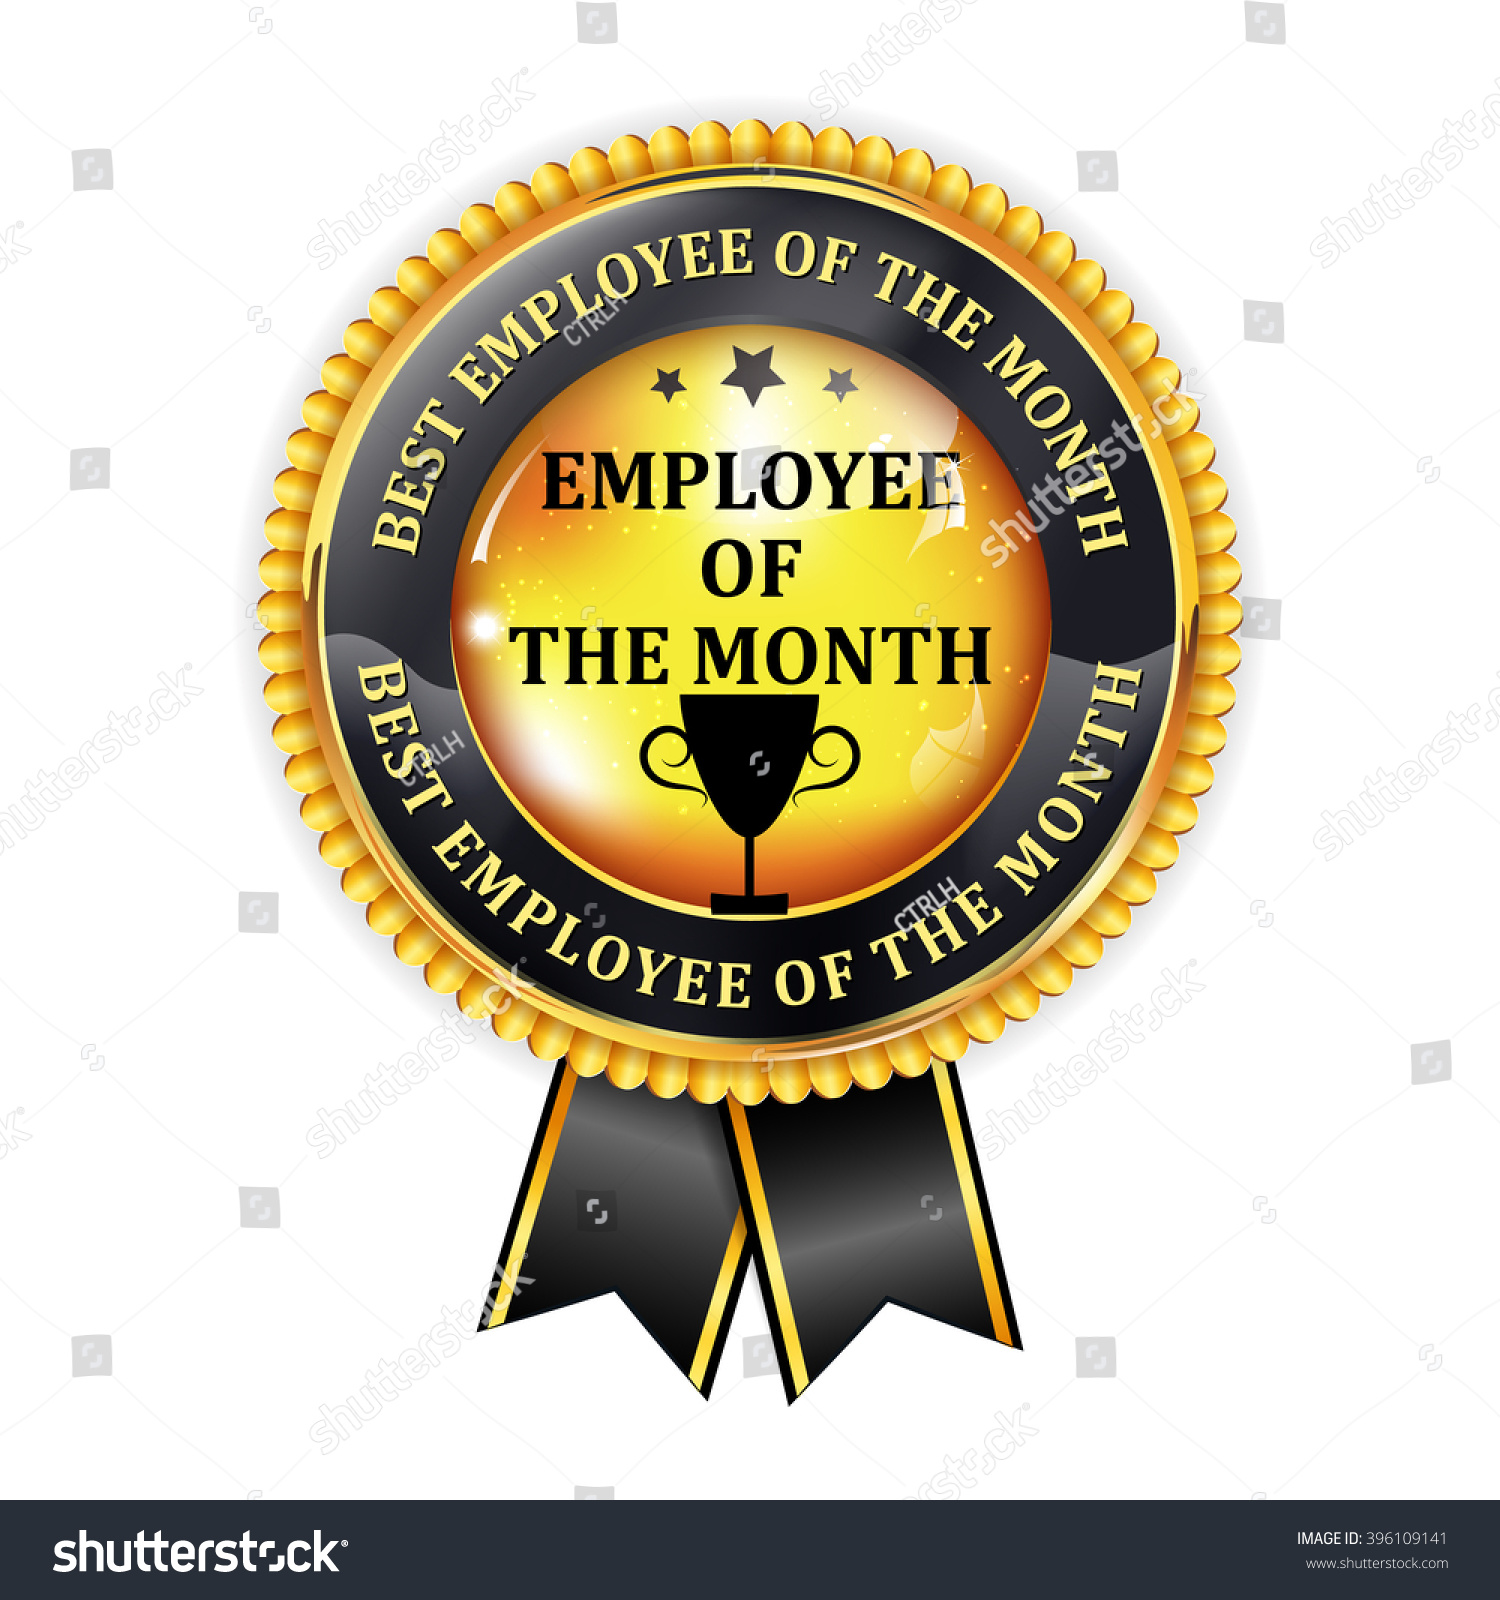 employee of the month clip art - photo #23